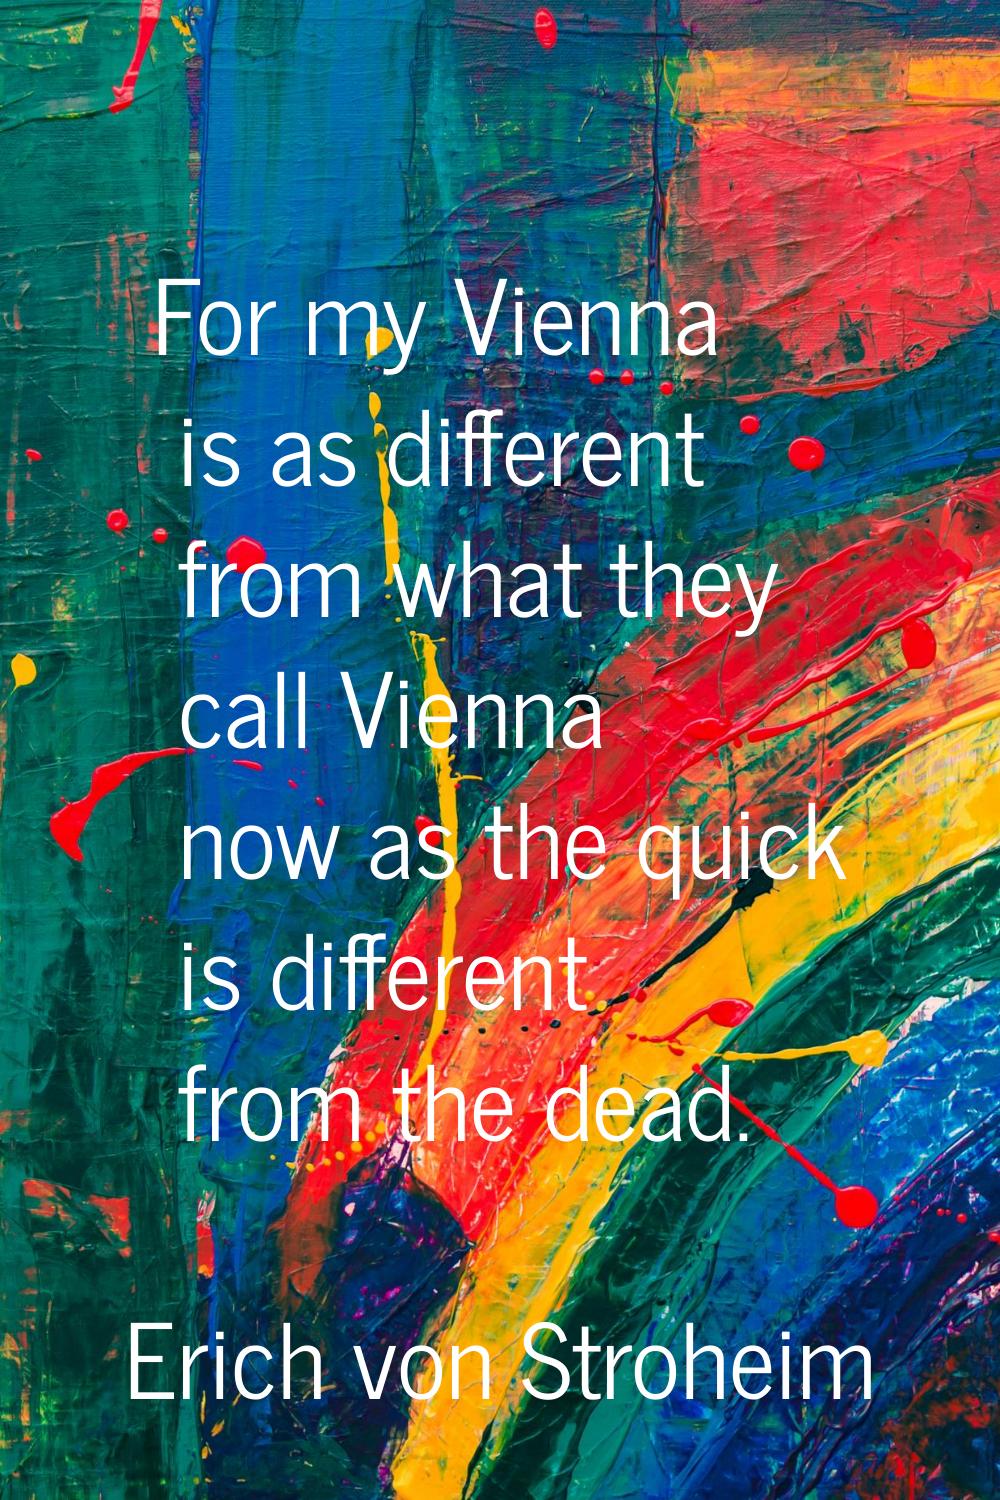 For my Vienna is as different from what they call Vienna now as the quick is different from the dea